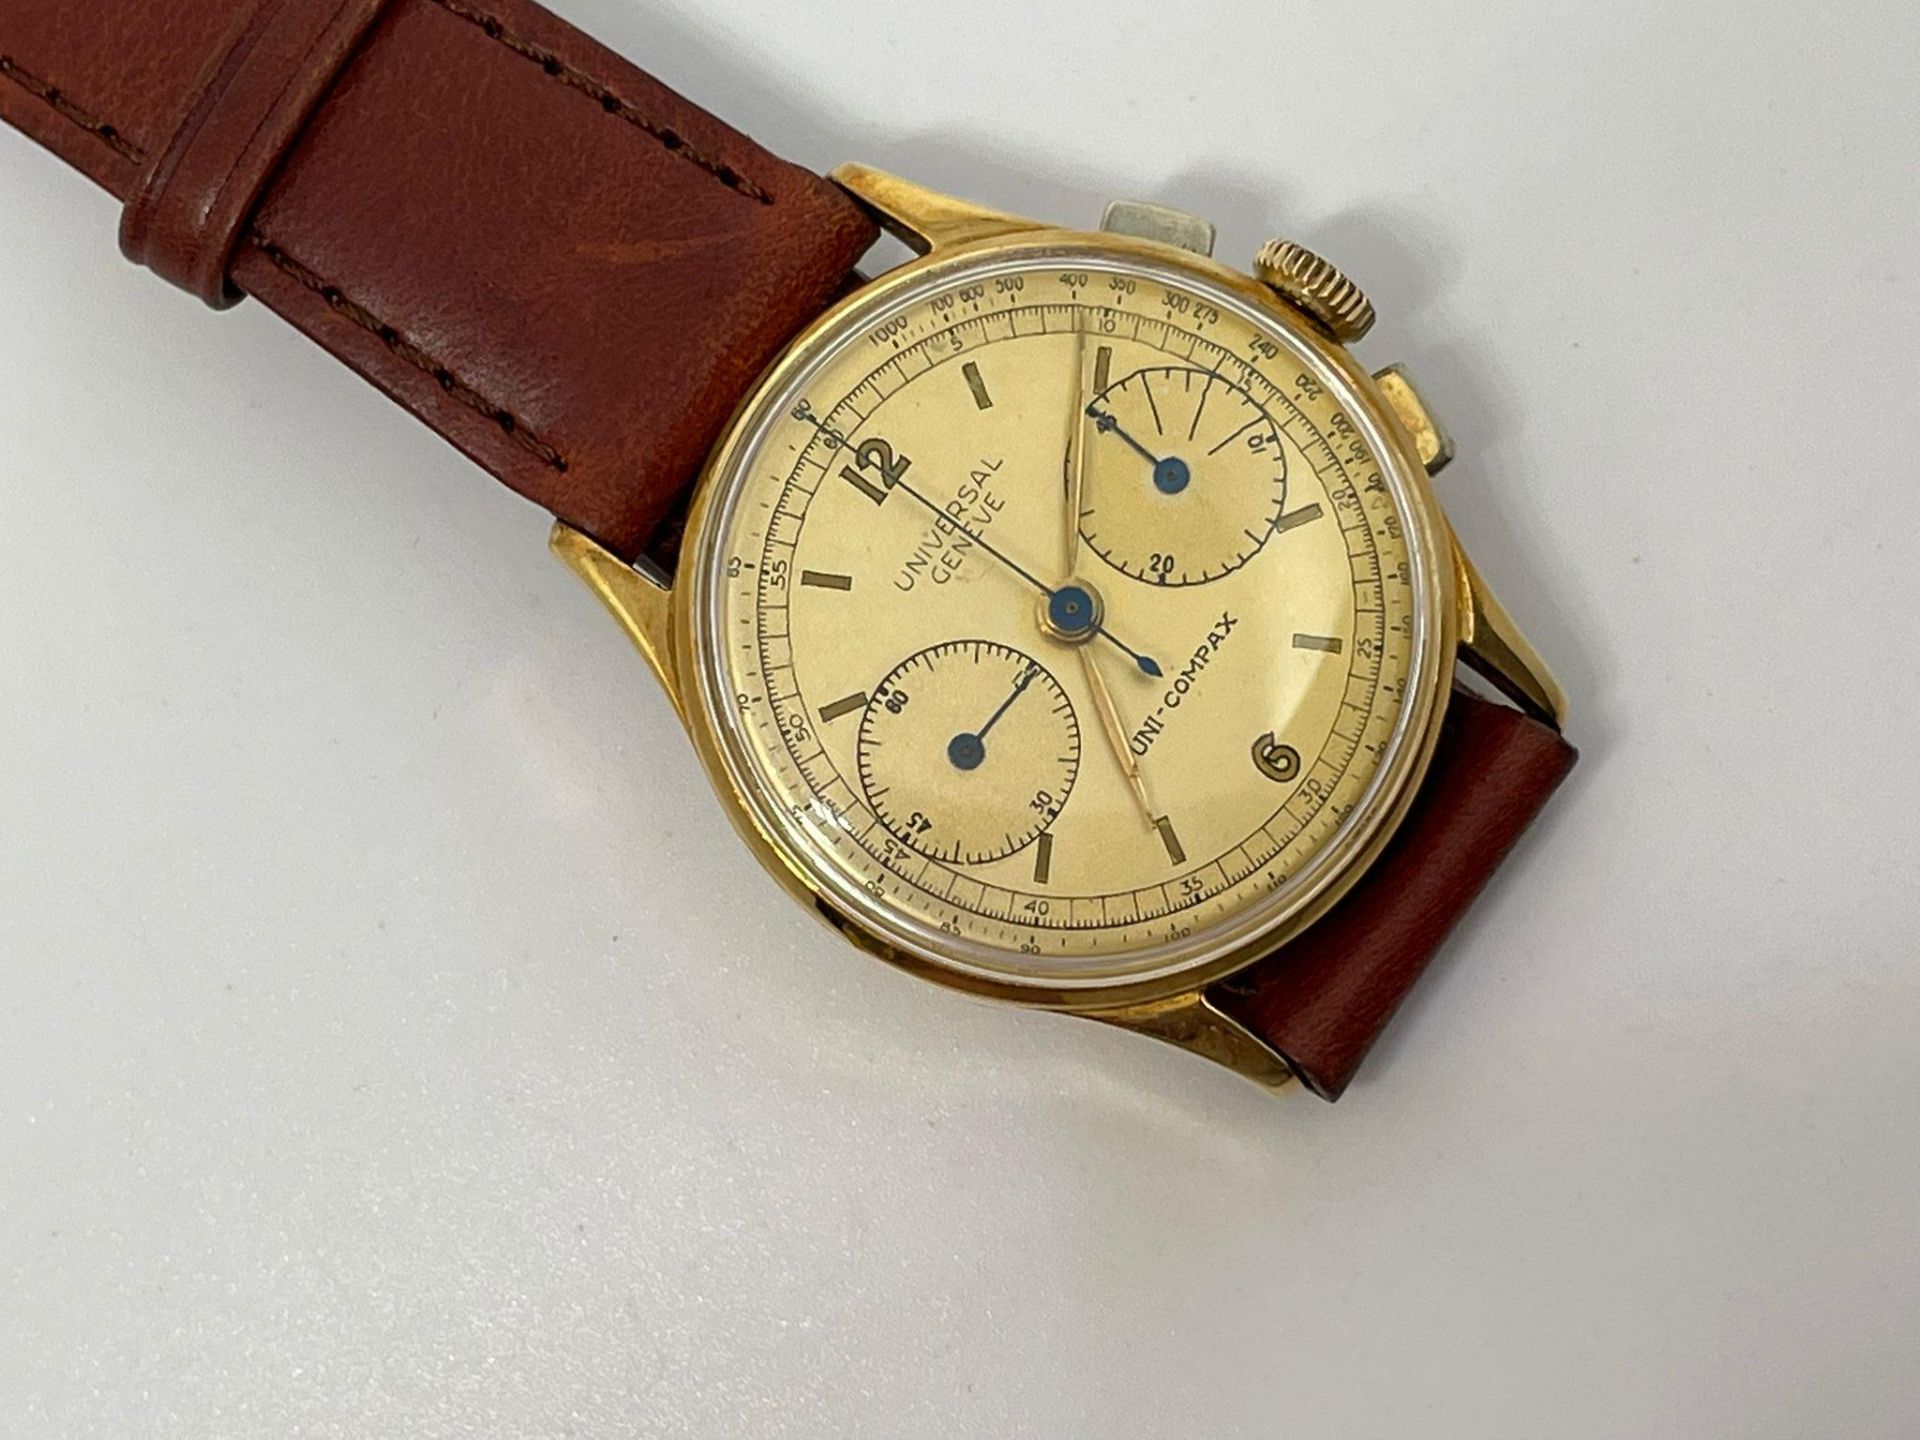 Gents vintage gold wristwatch - Image 5 of 5